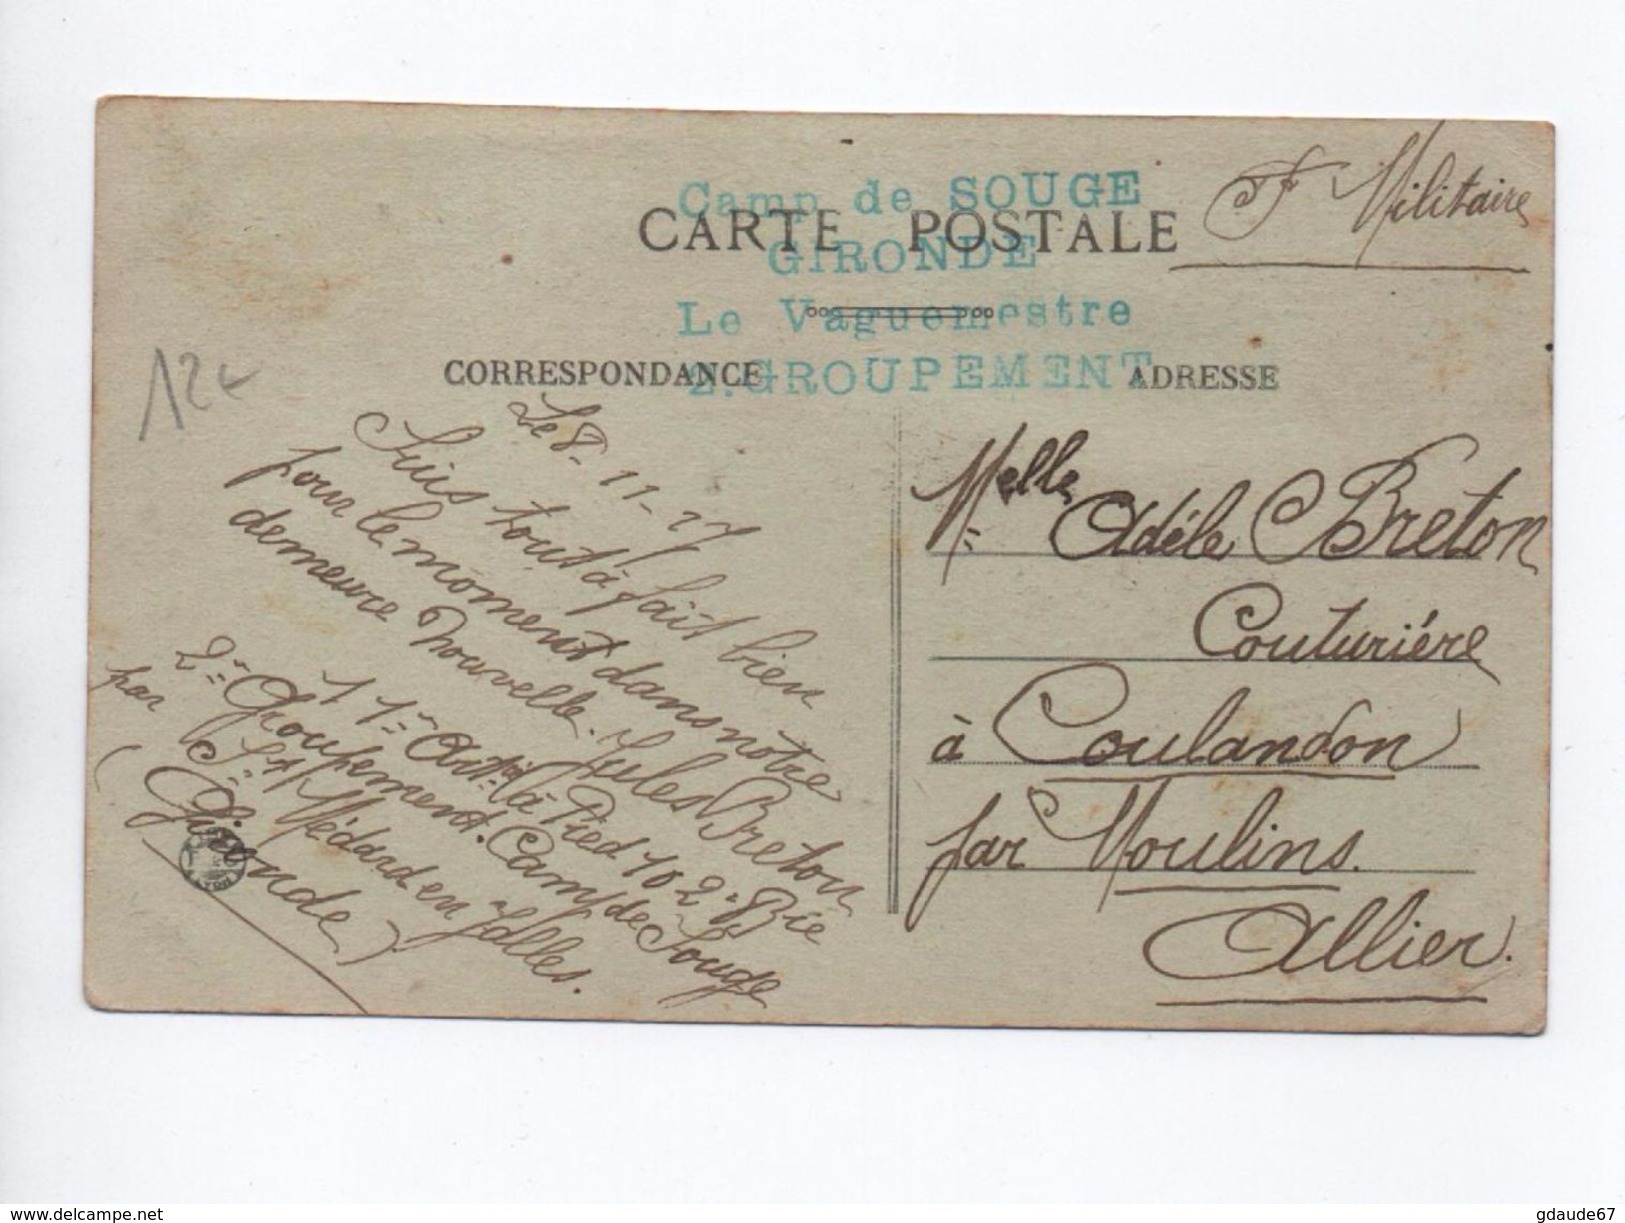 1927 - CARTE FM Avec CACHET Du CAMP DE SOUGE (GIRONDE) / 2° GROUPEMENT - Military Postmarks From 1900 (out Of Wars Periods)